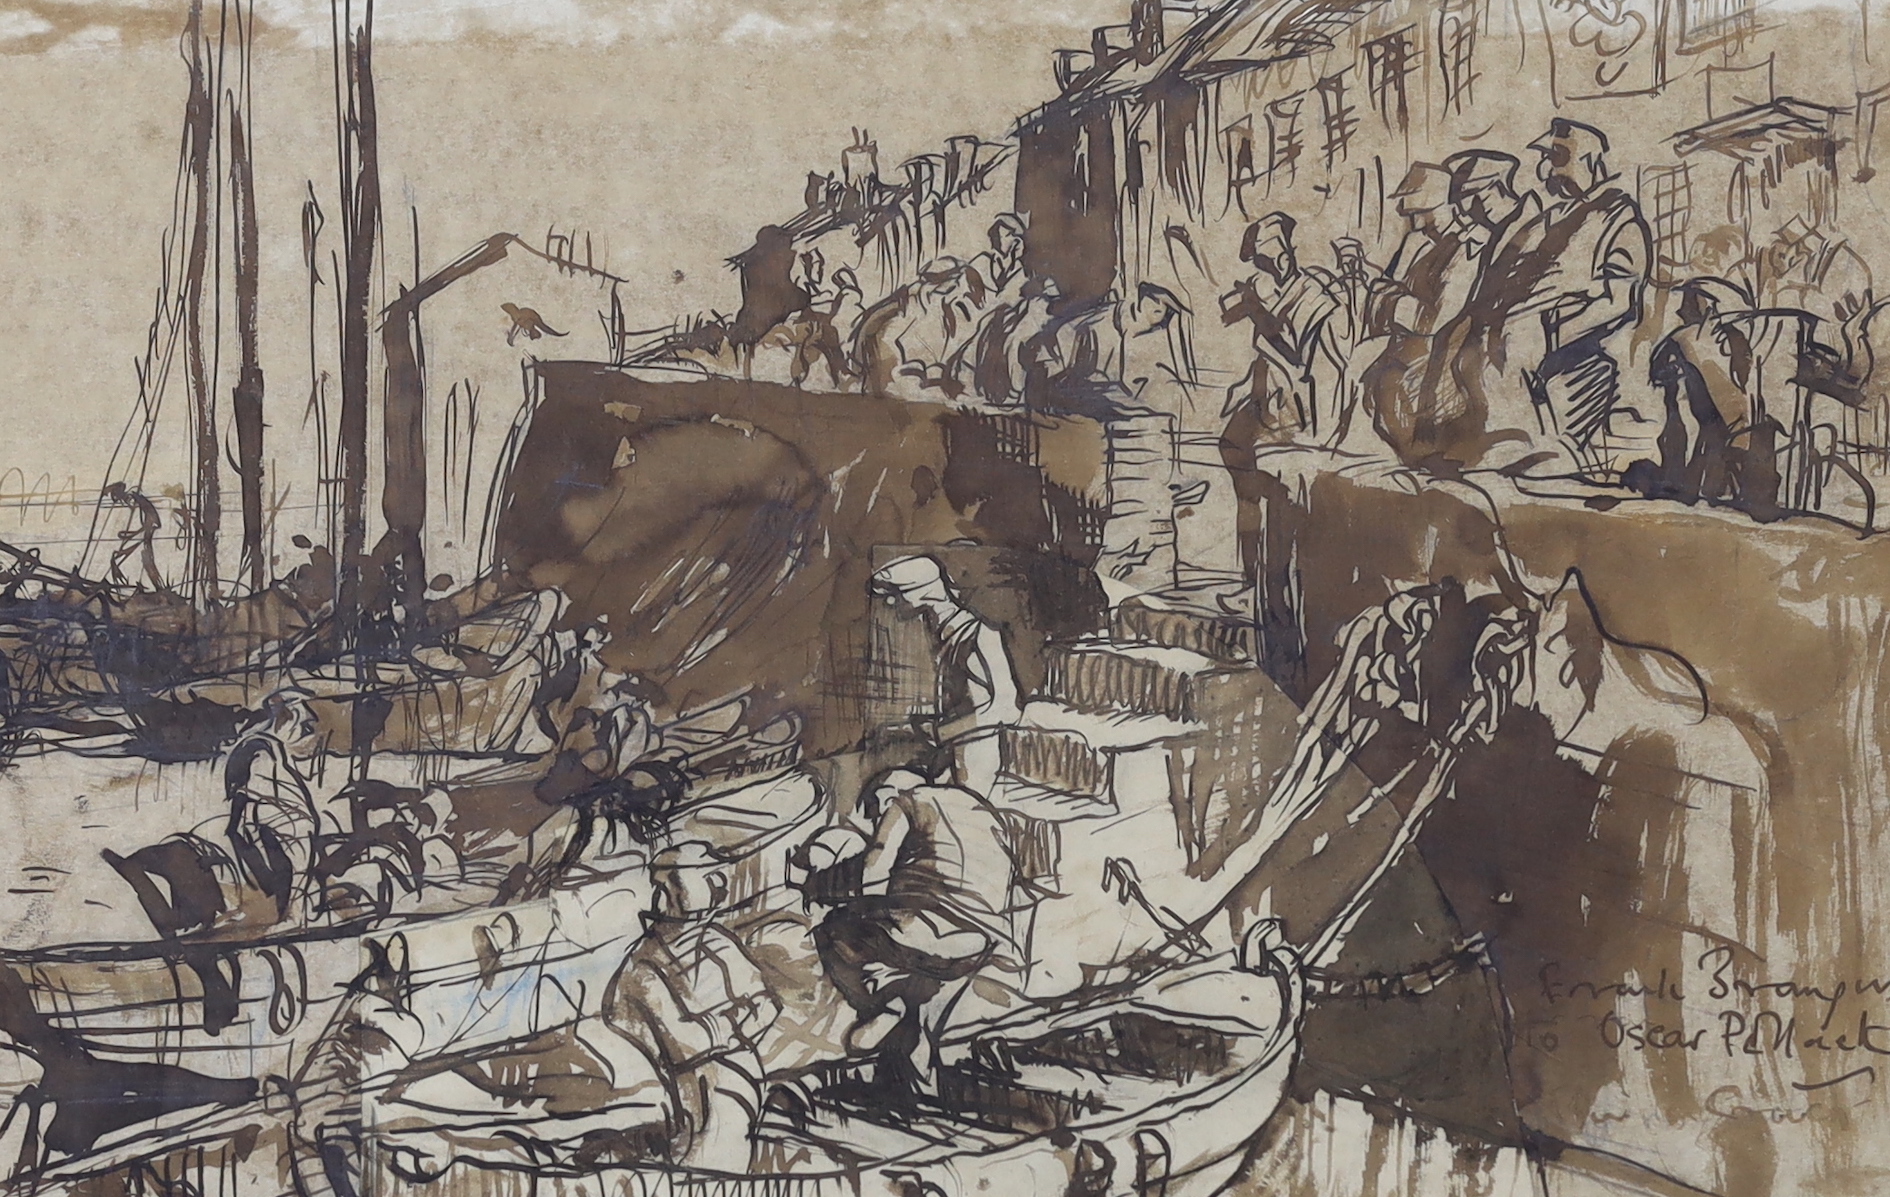 Frank Brangwyn (1867-1956), pen, ink and wash, Harbour scene with boats and figures, signed and inscribed, 25 x 38cm